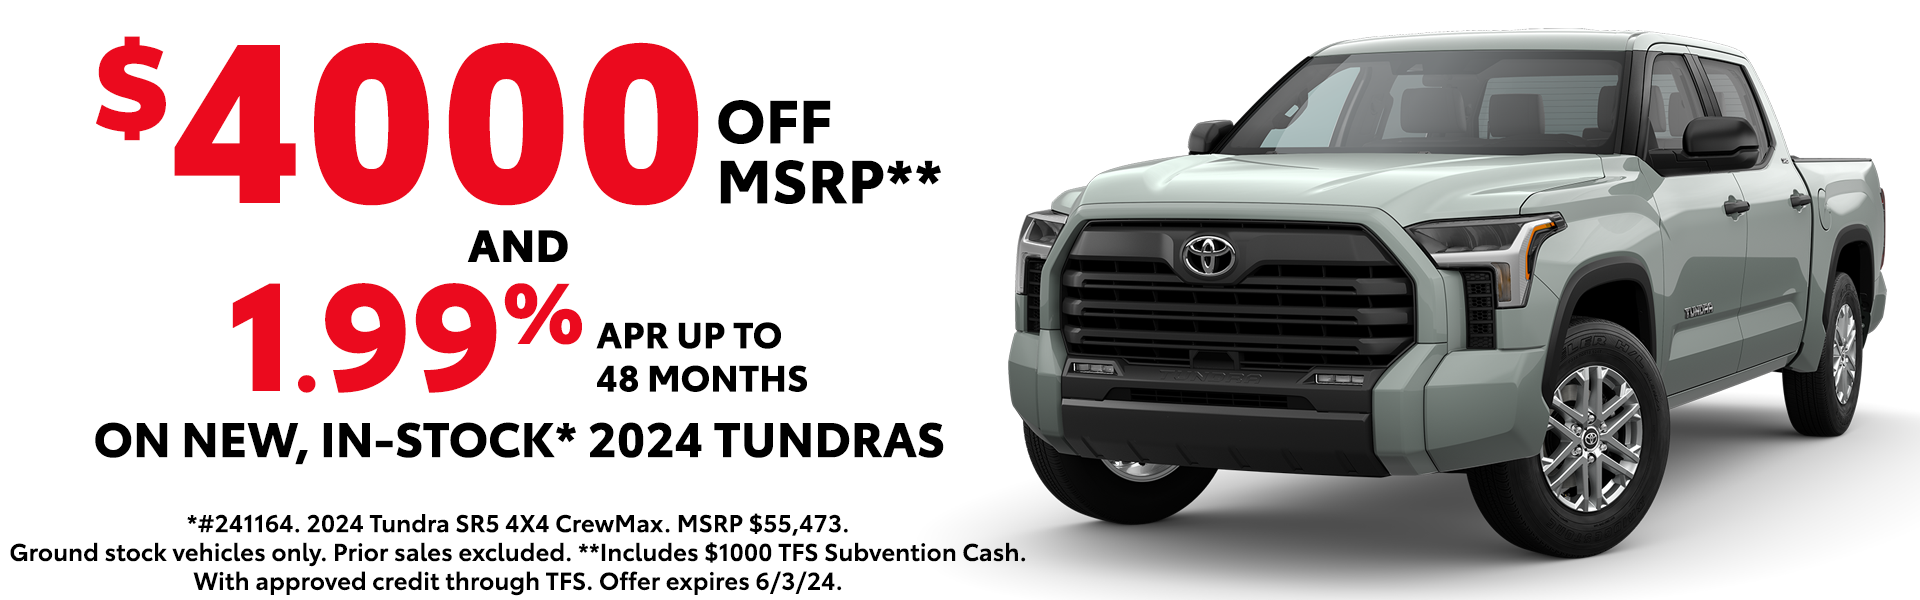 0% APR for 48 Months on New Tundras